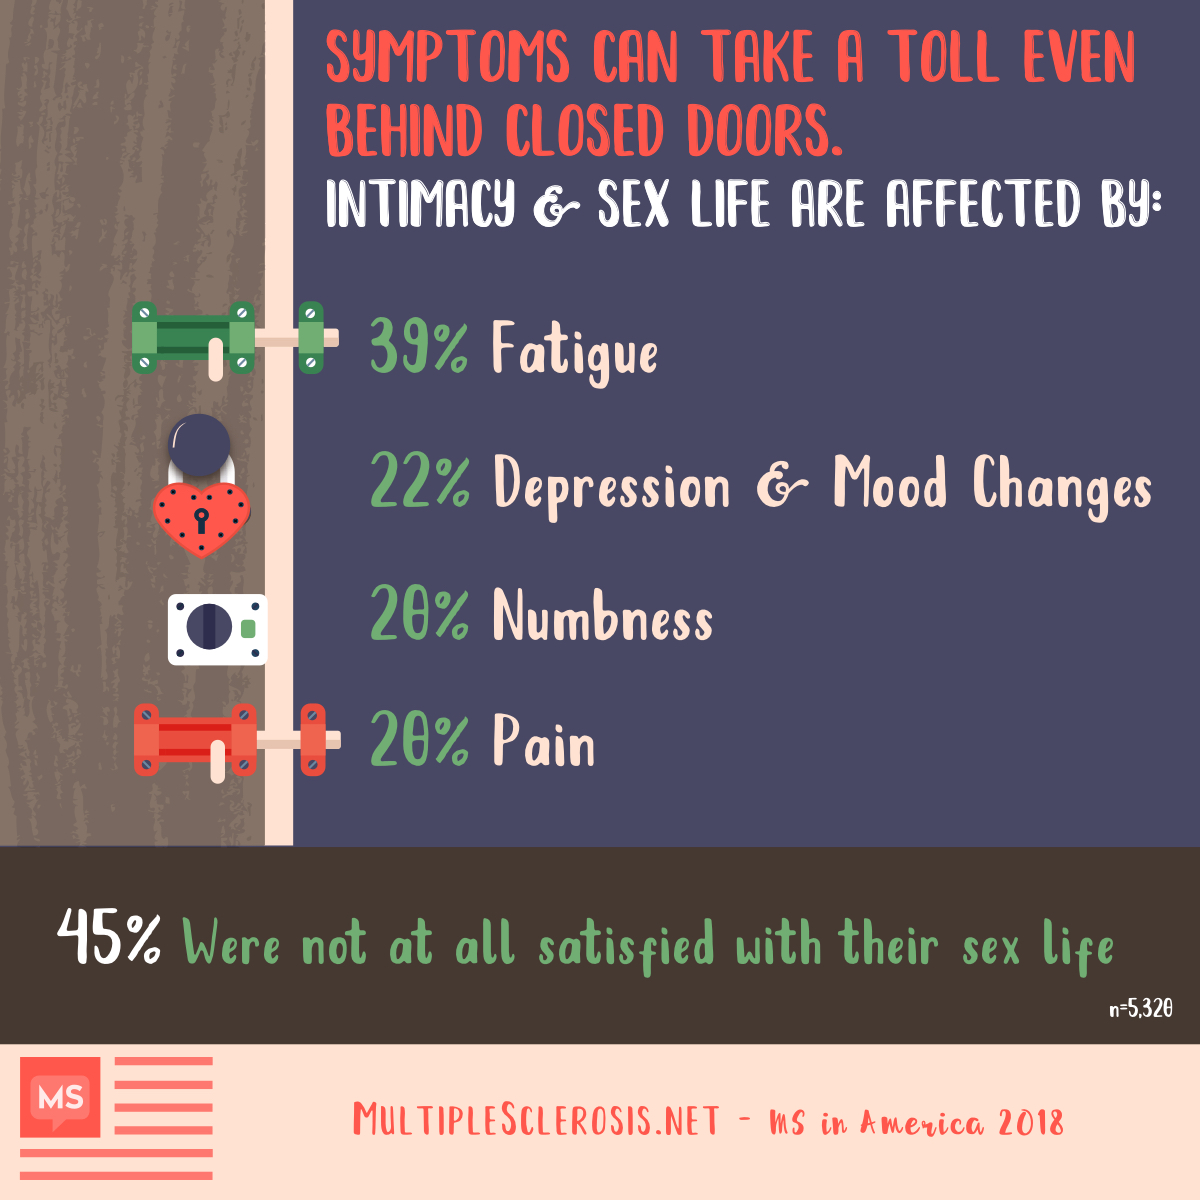 Symptoms can take a toll even behind closed doors. 45% were not at all satisfied with their sex life. For 39%, fatigue negatively impacts intimacy, for 22%, depression and mood changes affect intimacy, for 20%, numbness affects the ability to enjoy intimacy, for 20%, pain impacted sex life & intimacy